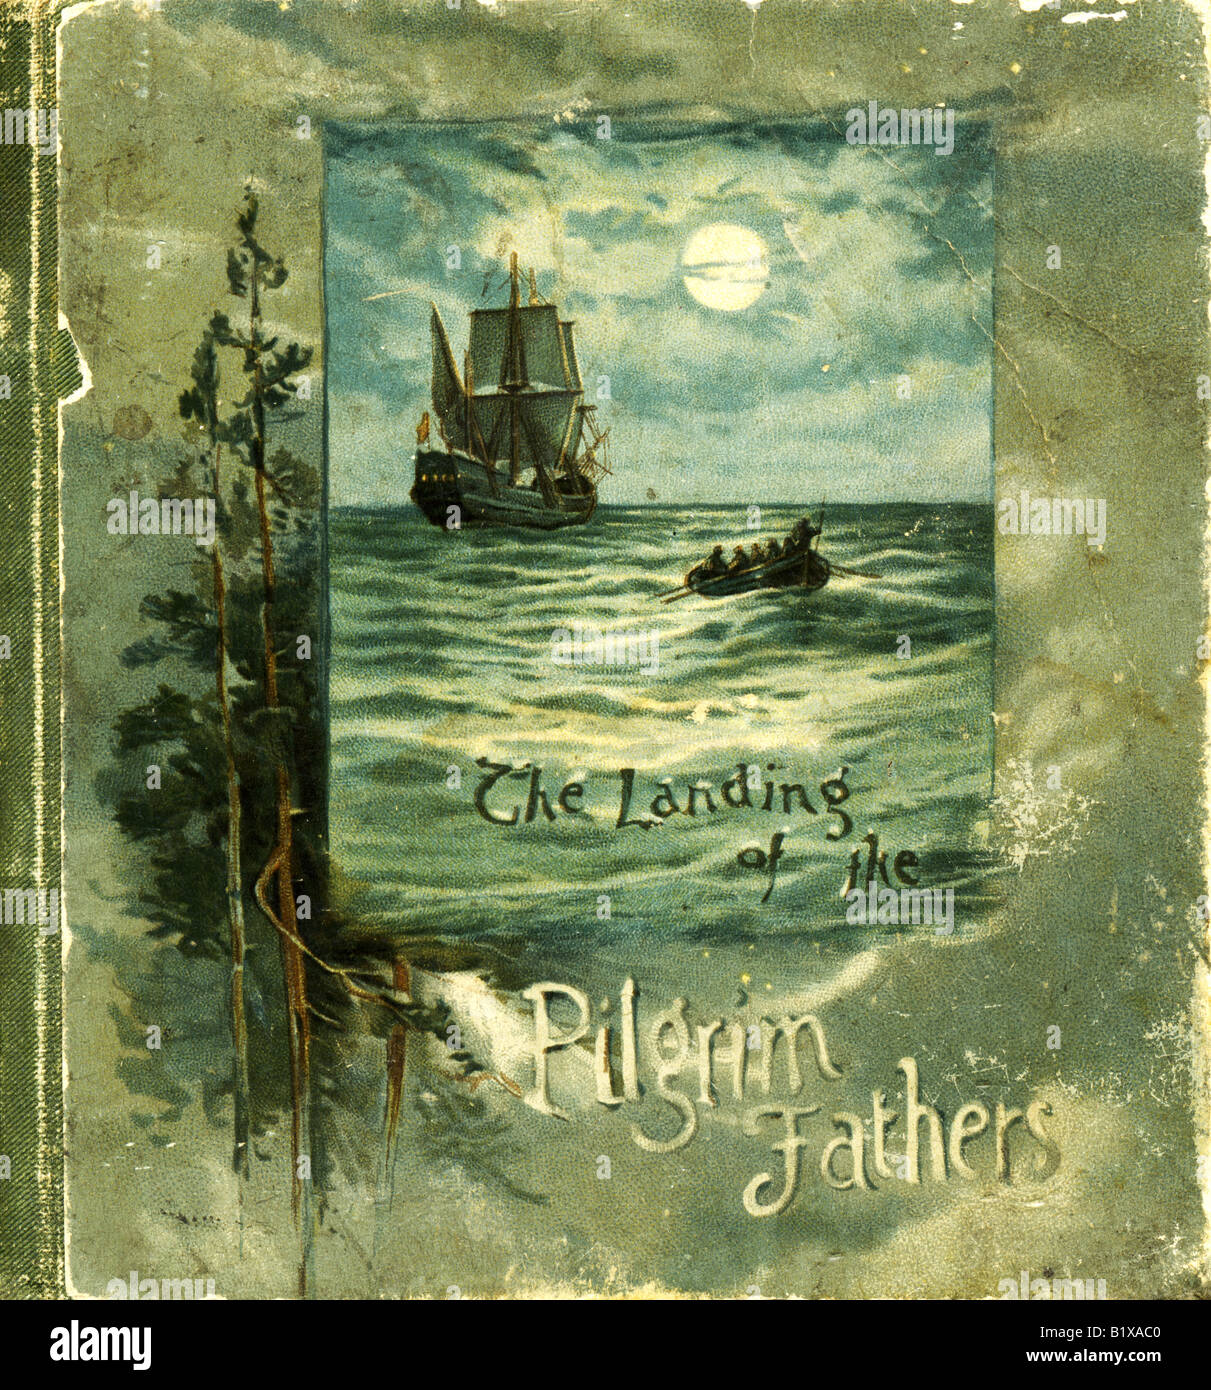 Front Cover of The Landing of the Pilgrim Fathers a Victorian illustrated poetry book  FOR EDITORIAL USE ONLY Stock Photo